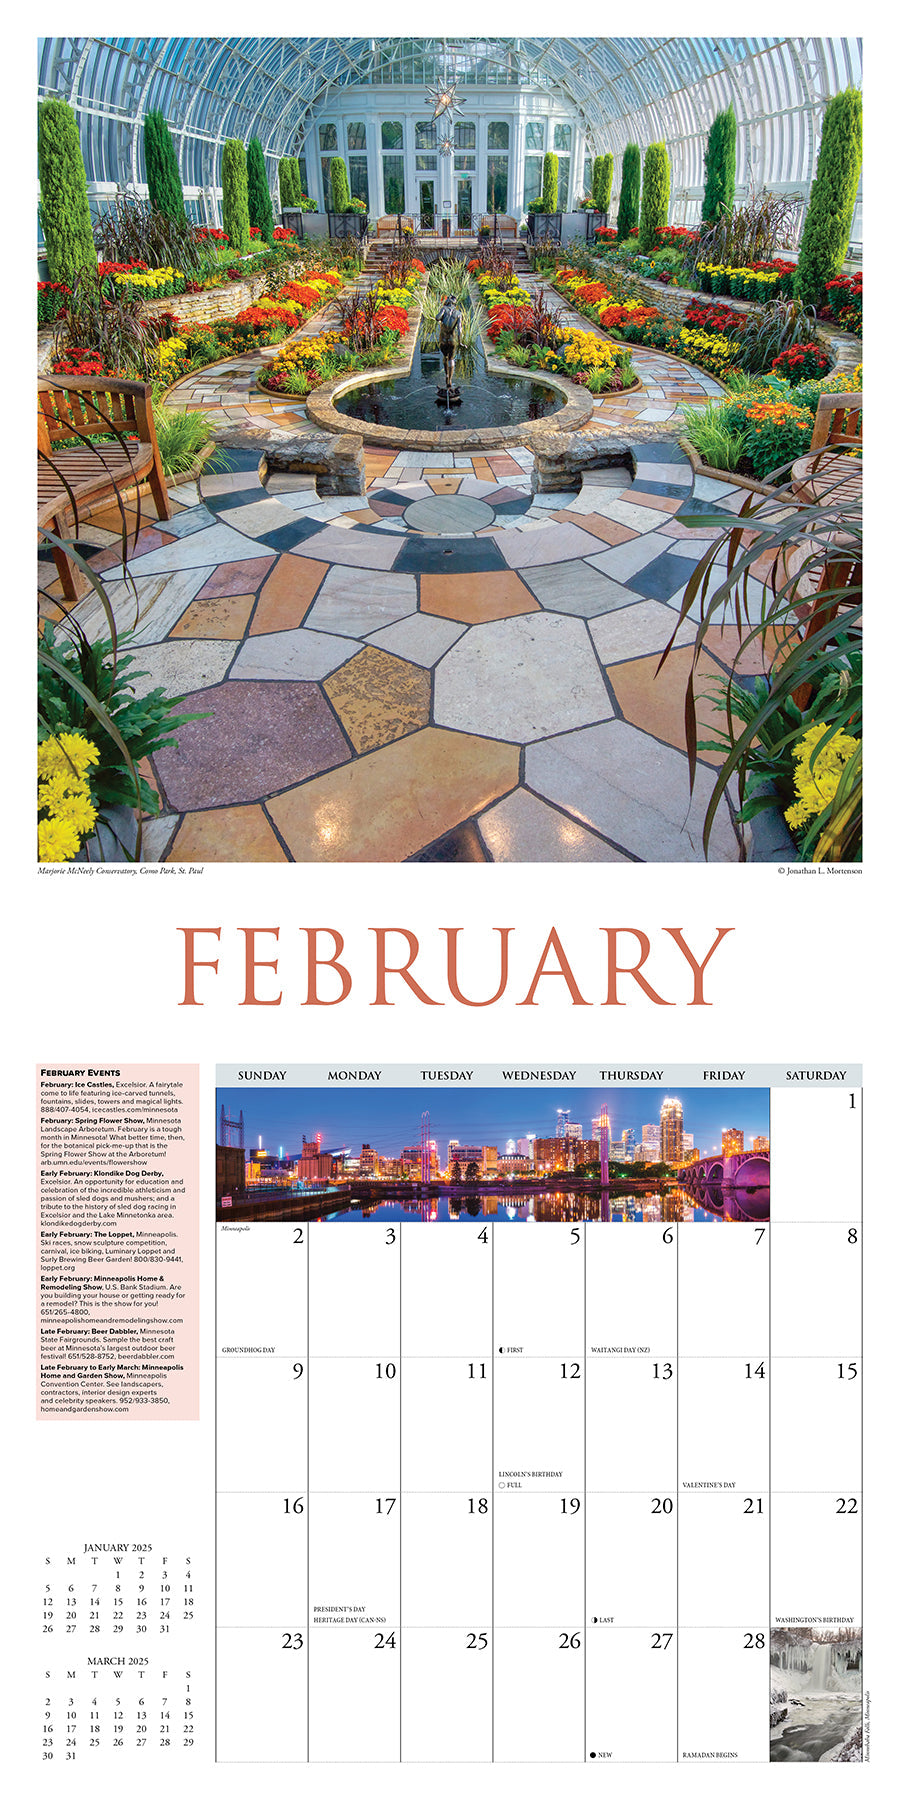 2025 Twin Cities - Square Wall Calendar